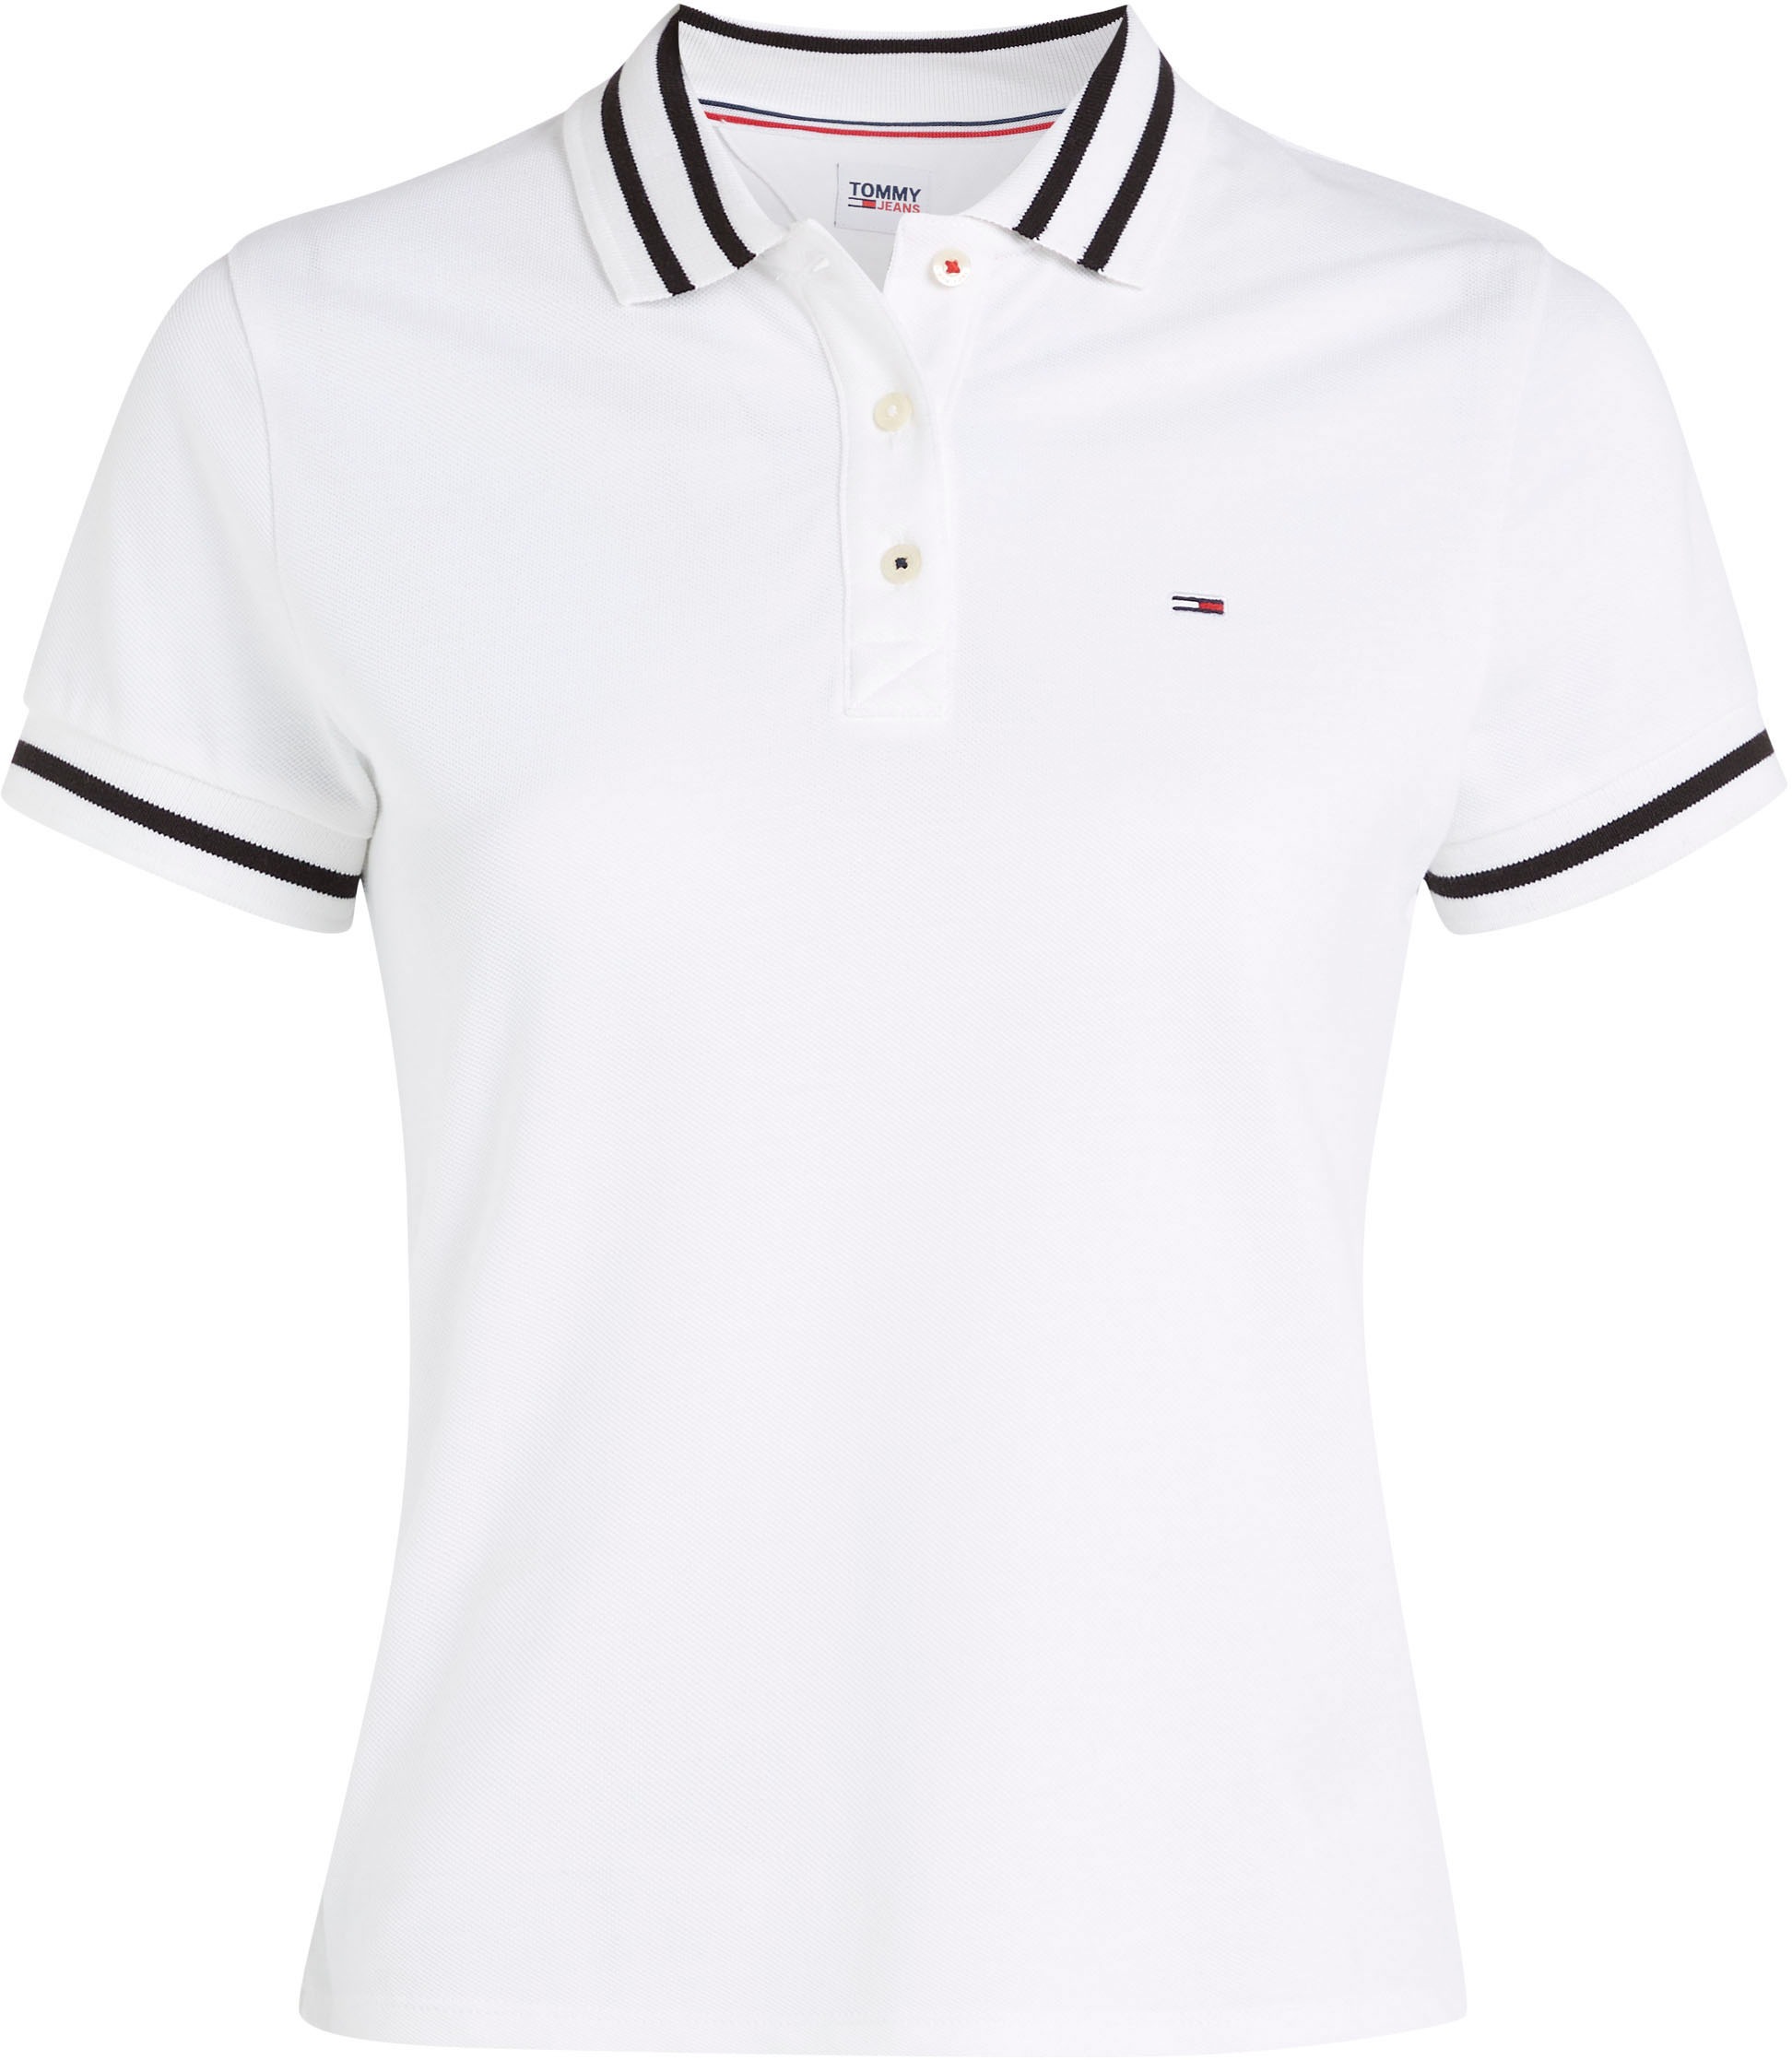 »TJW | walking Label-Flag POLO«, Poloshirt Jeans shoppen TIPPING ESSENTIAL Tommy Kontraststreifen mit I\'m & Jeans Tommy